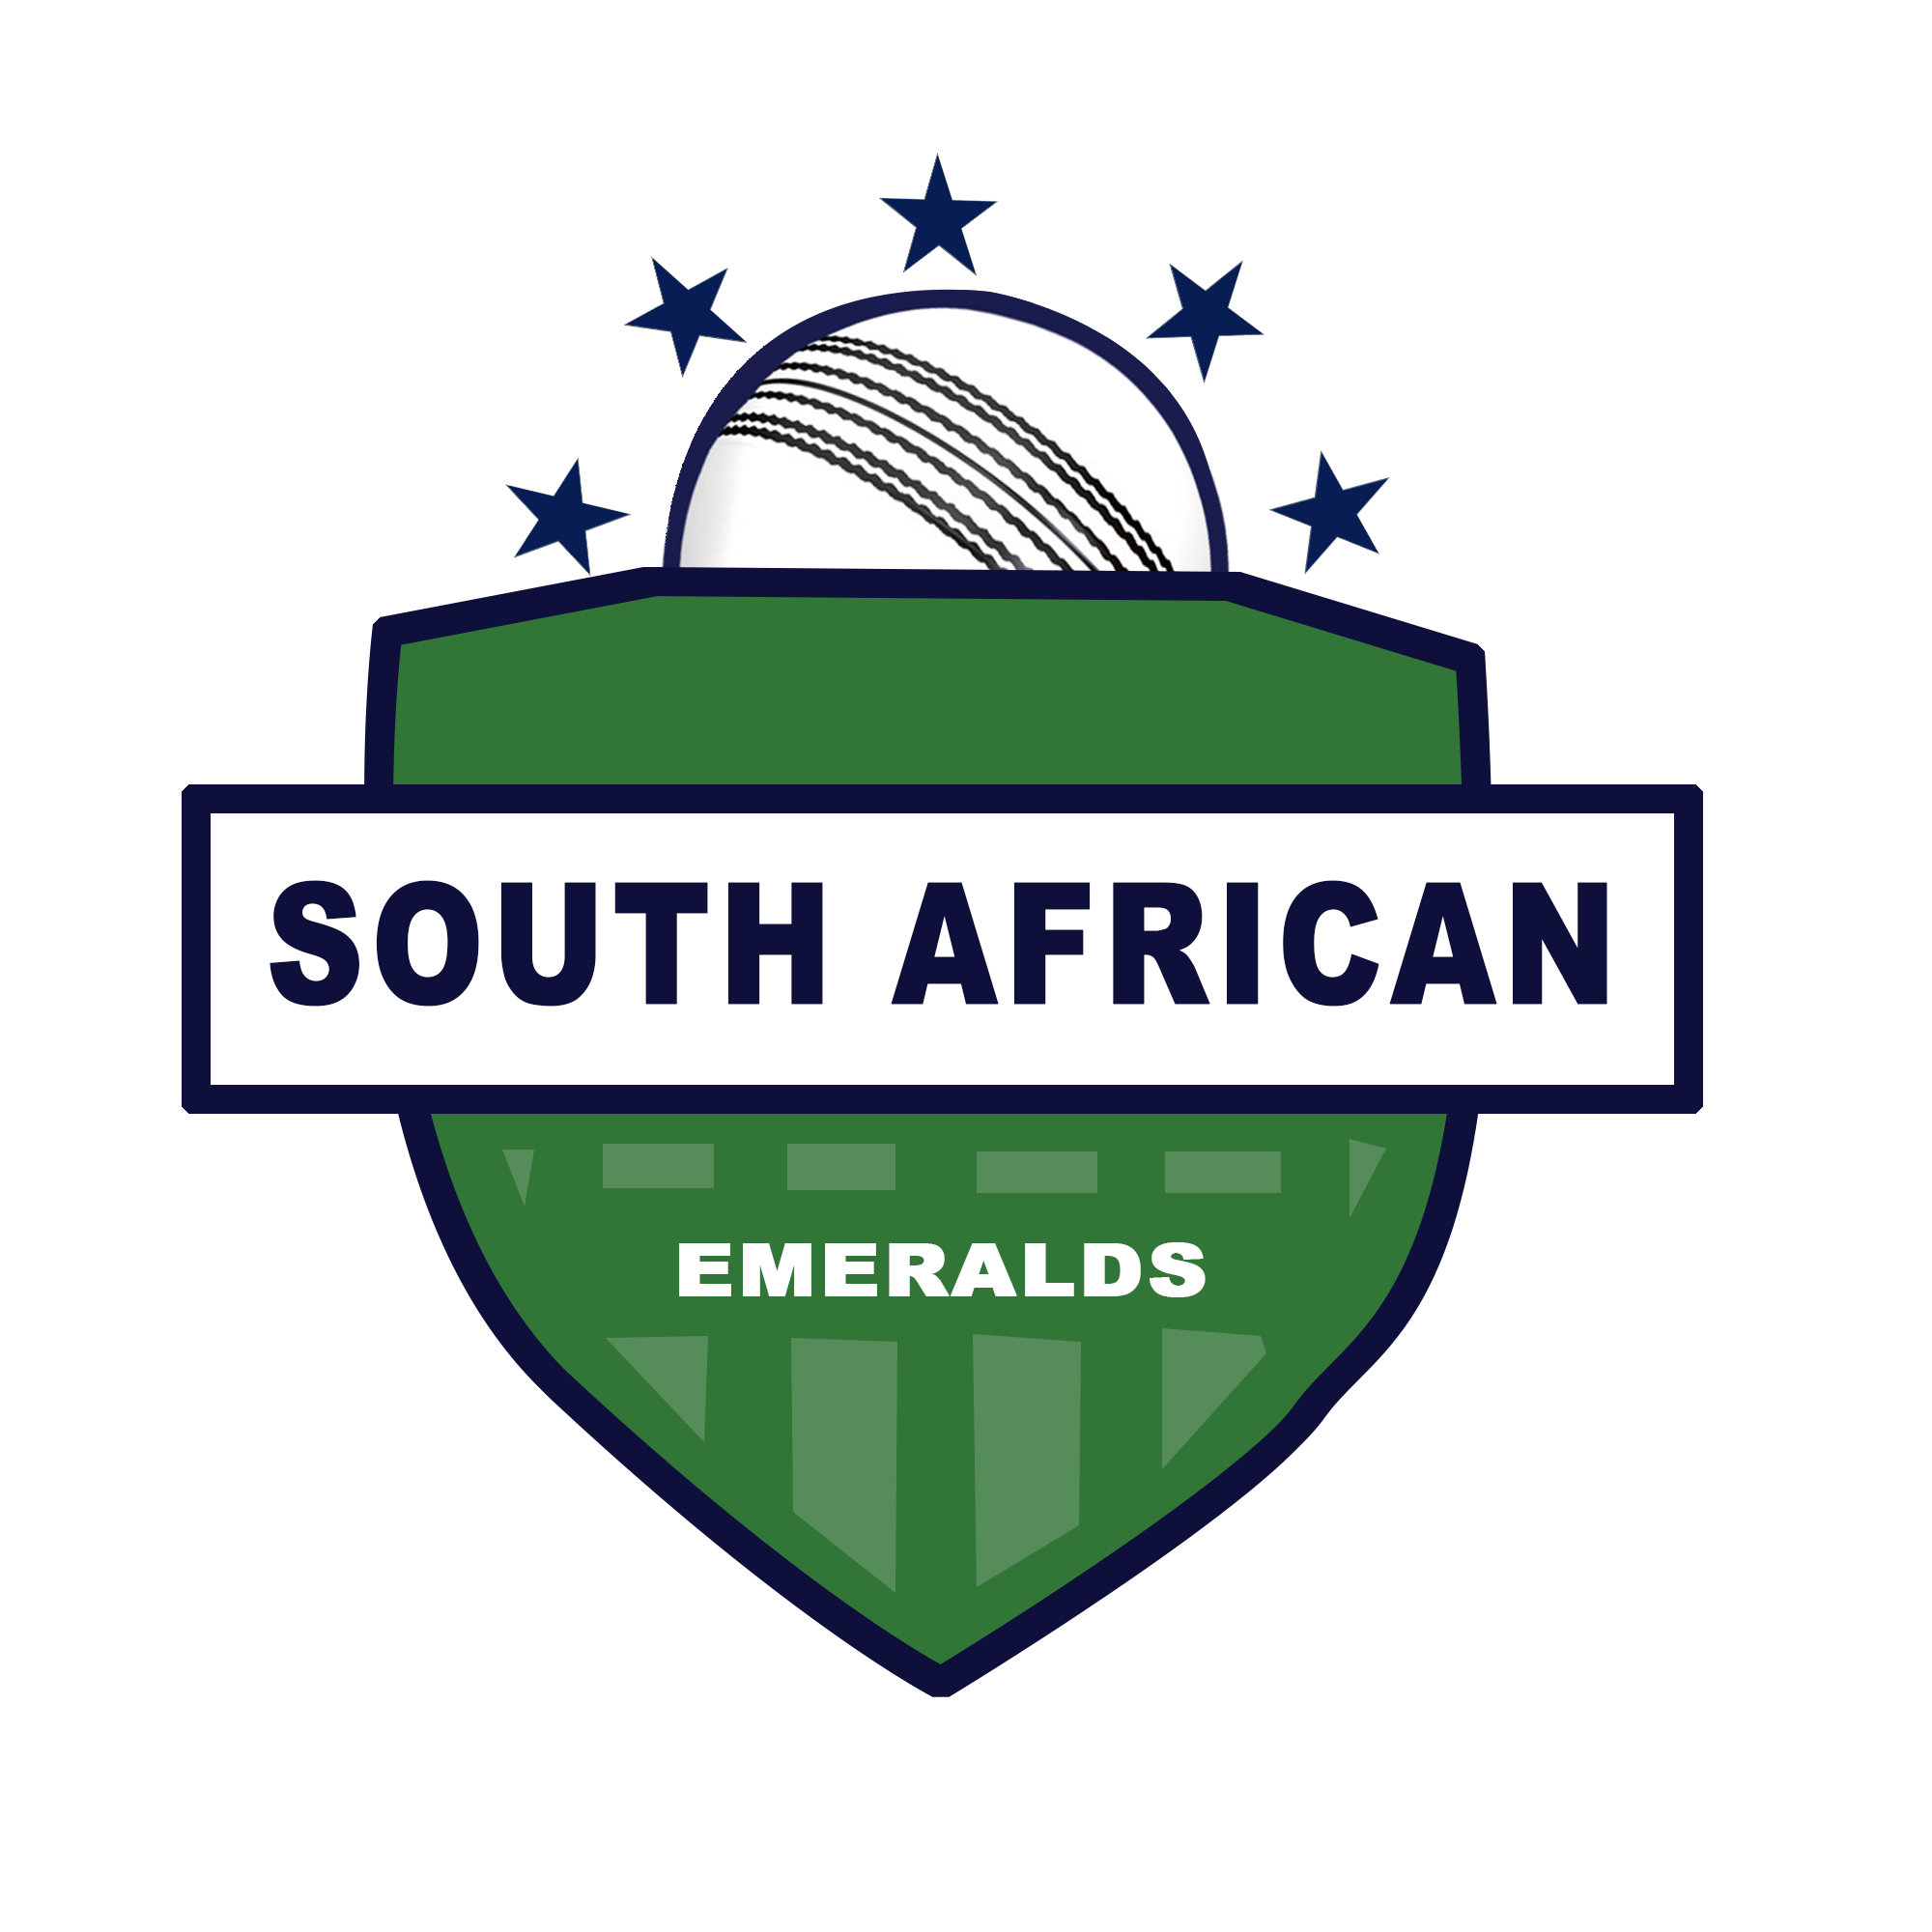 The logo of GPCL team South African Emeralds